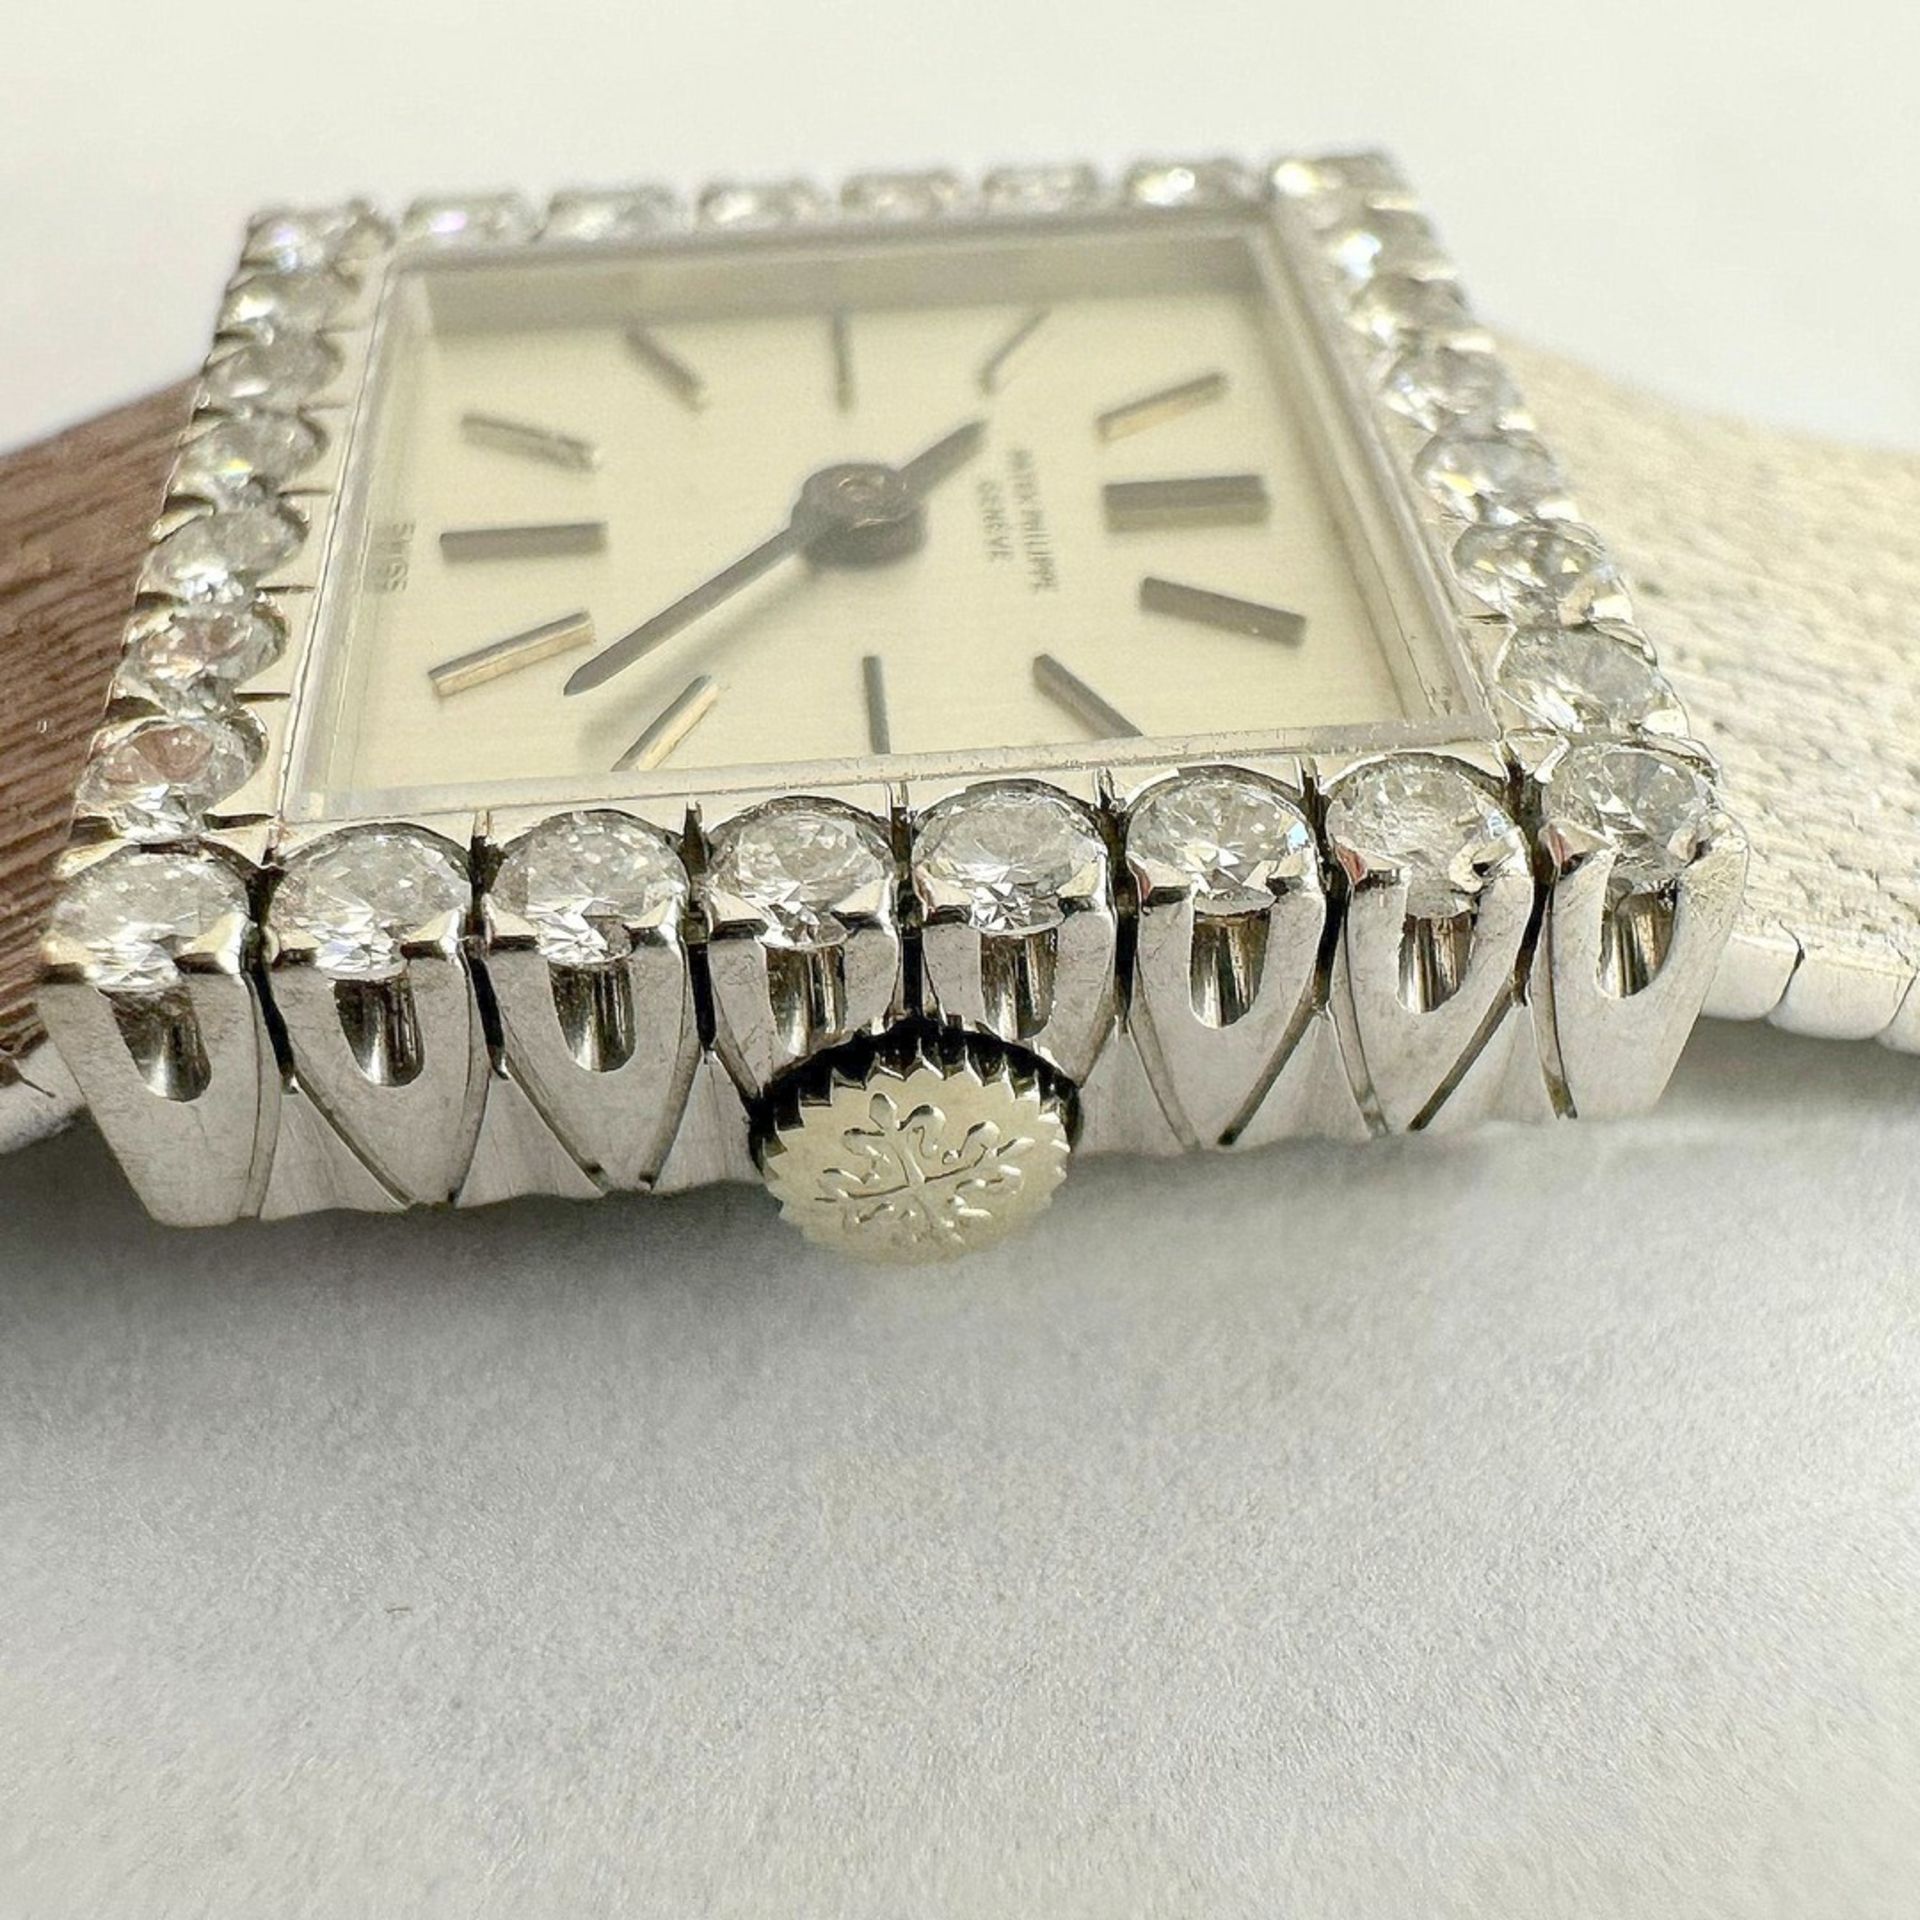 Patek Philippe / Cocktail Vintage 18K White Gold - Lady's White Gold Wristwatch - Image 4 of 14